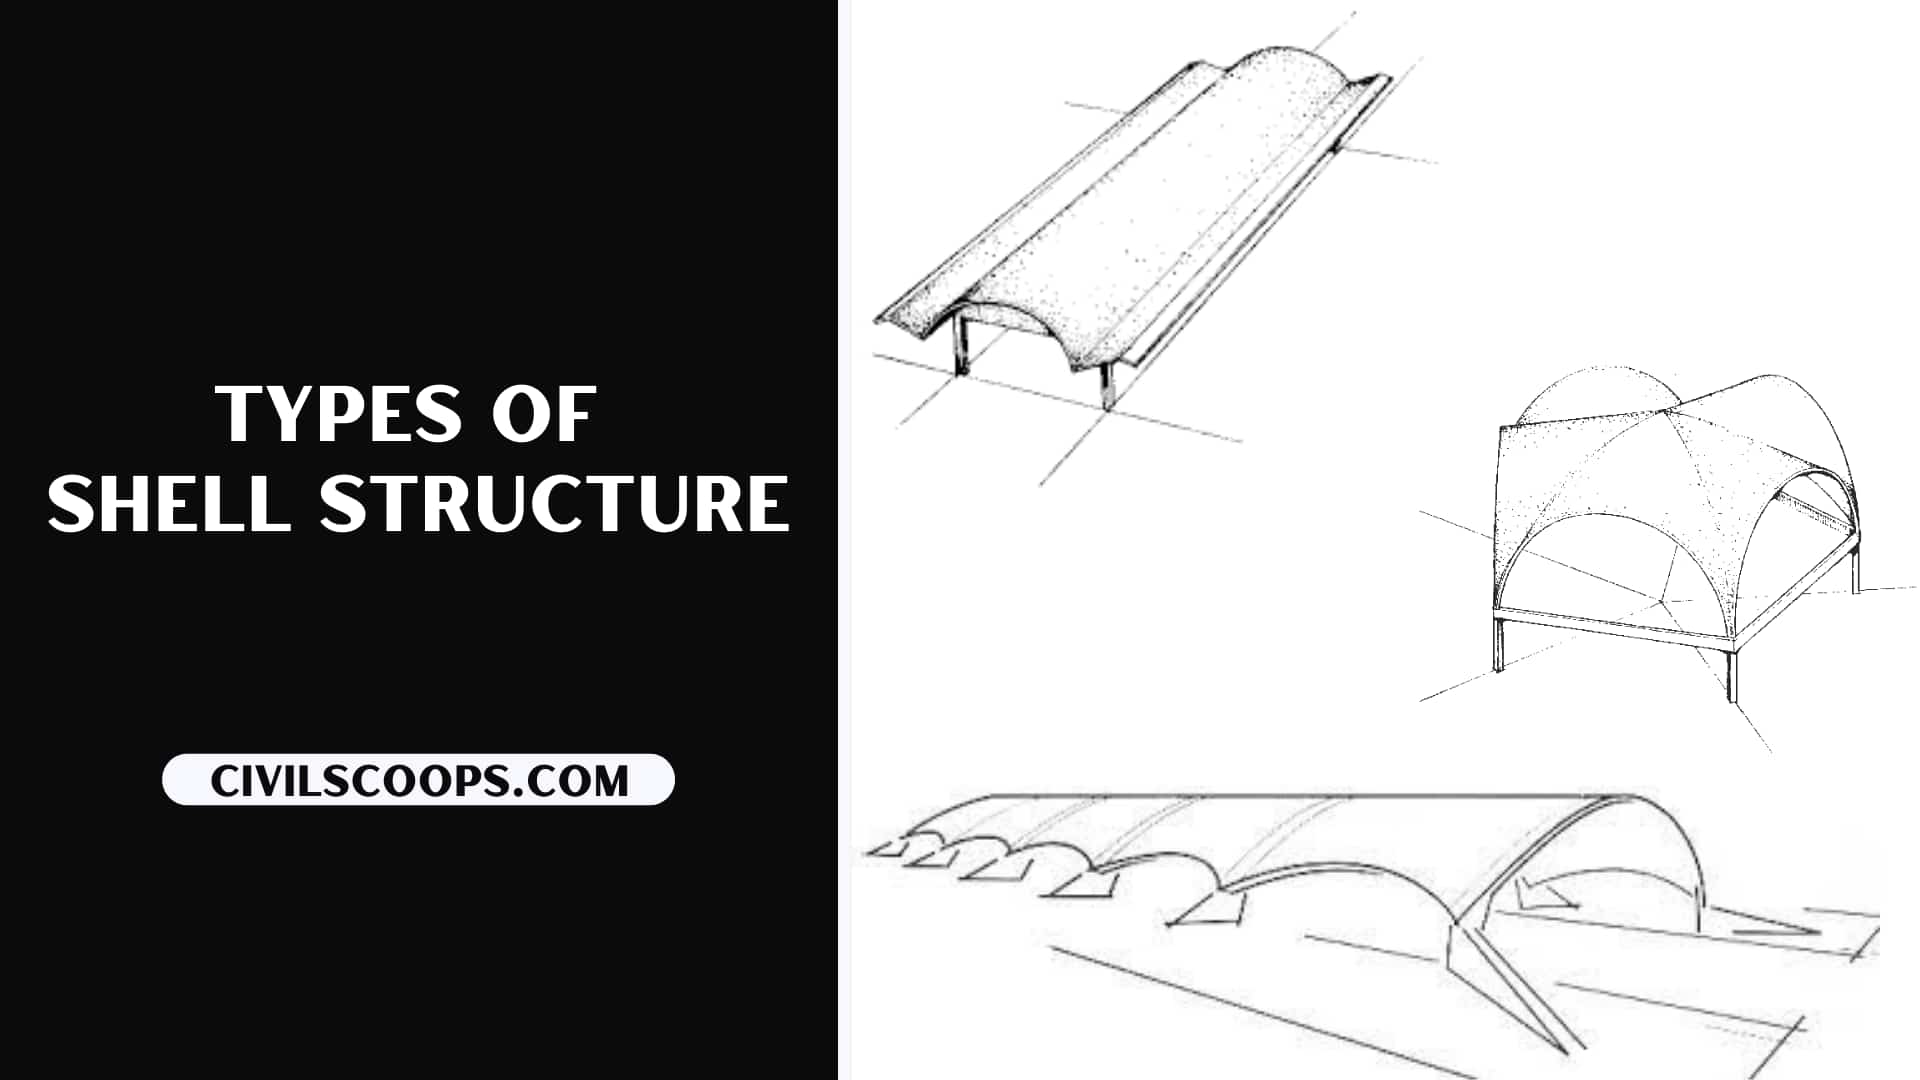 Types of Shell Structure